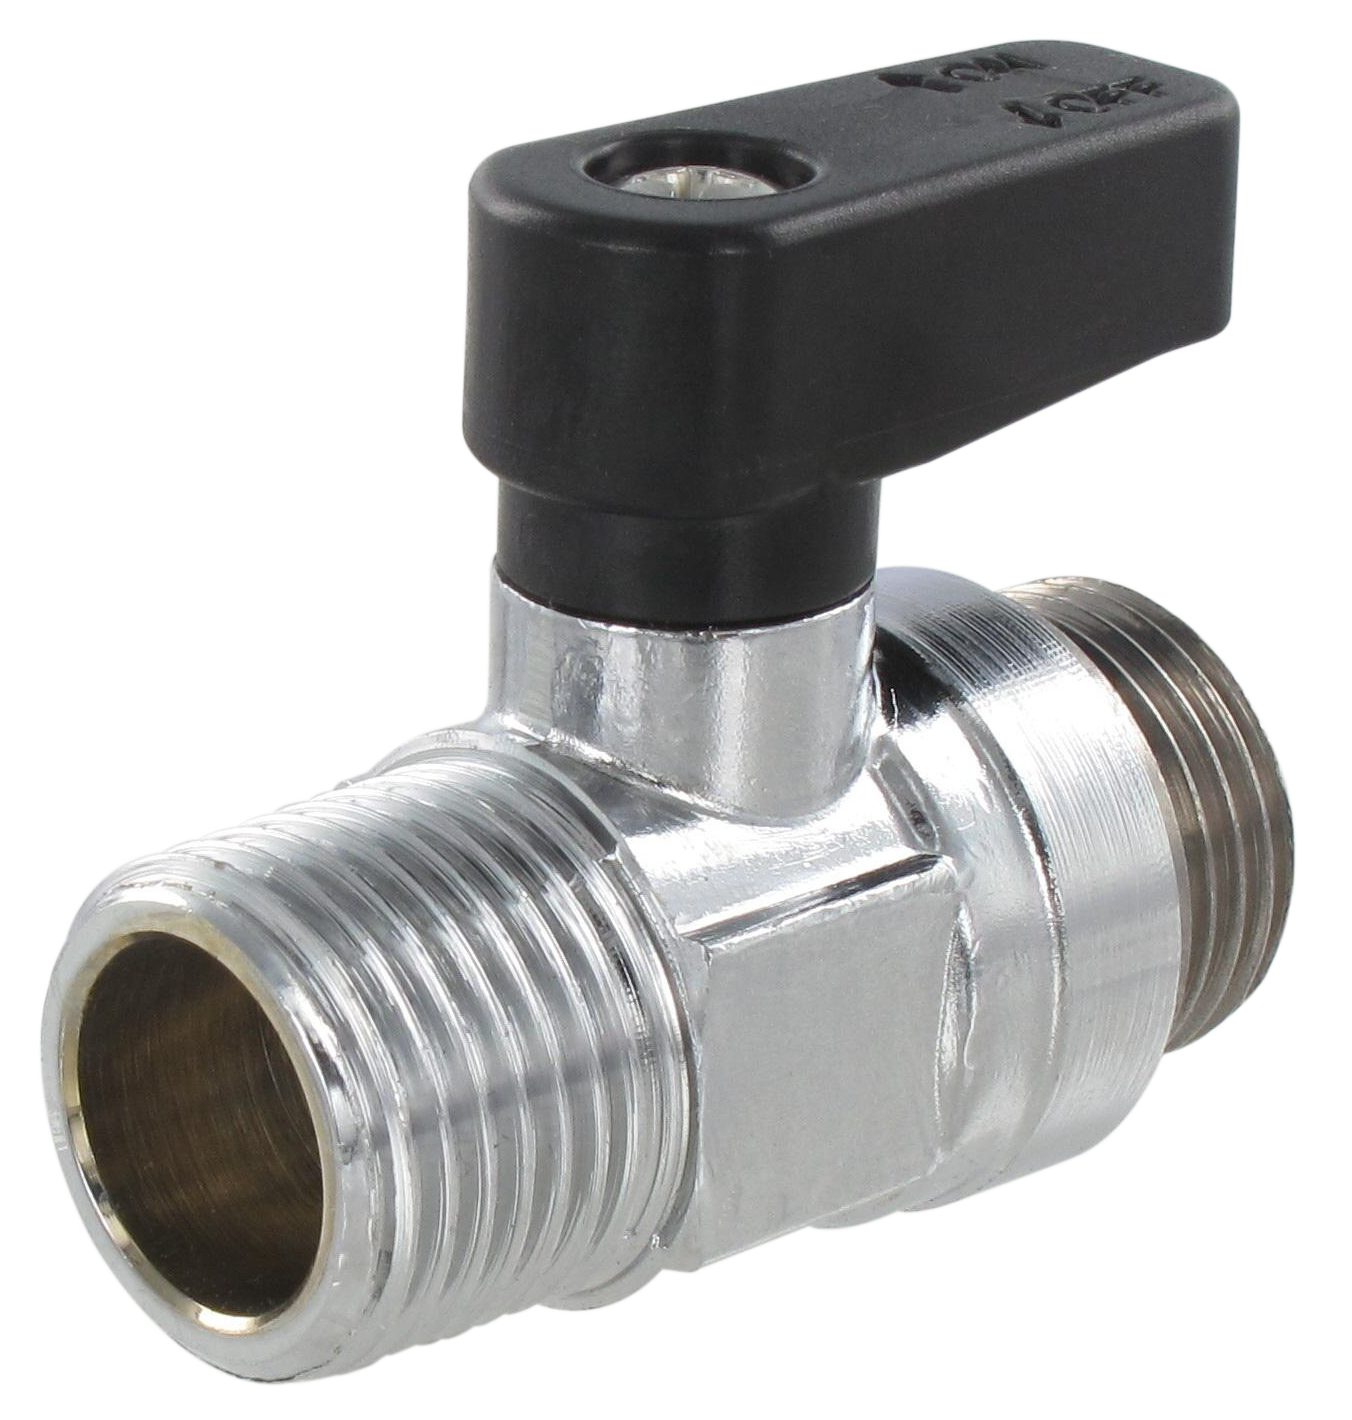 Ball valve male BSP conical / male BSP cylindrical 1/2 Nickel-plated brass ball valves